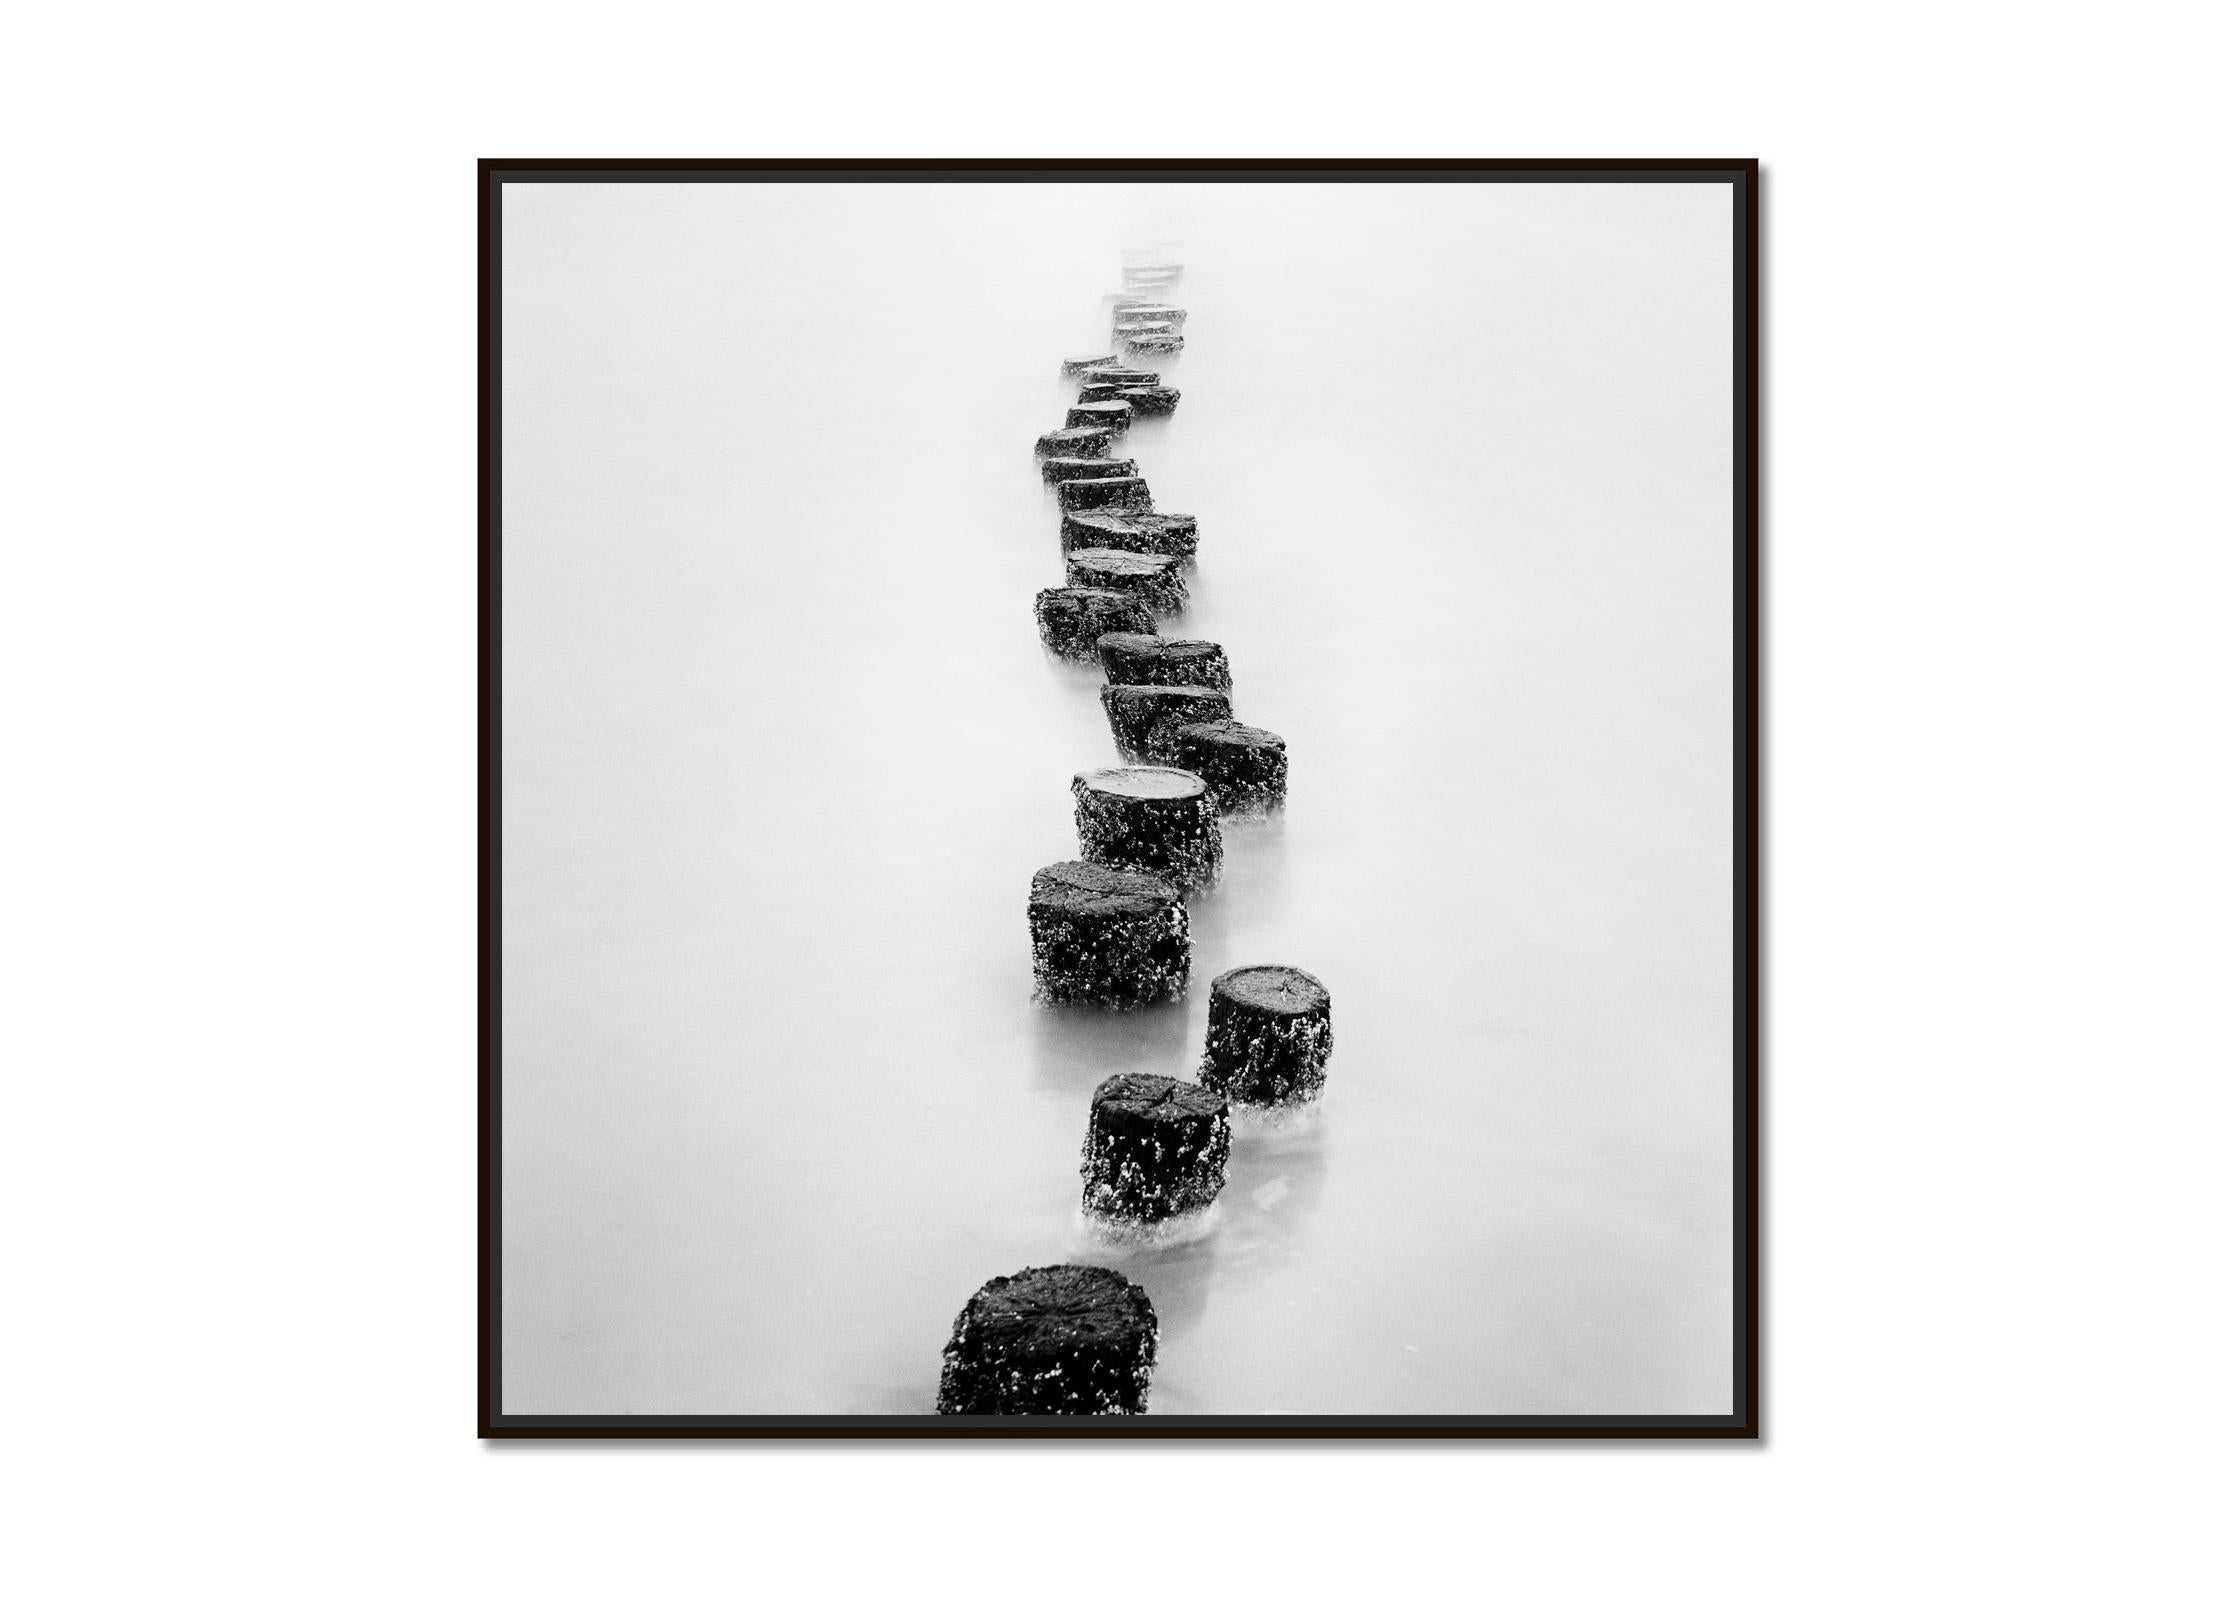 Wooden Pegs, long exposure, black and white, fine art, waterscape, photography - Photograph by Gerald Berghammer